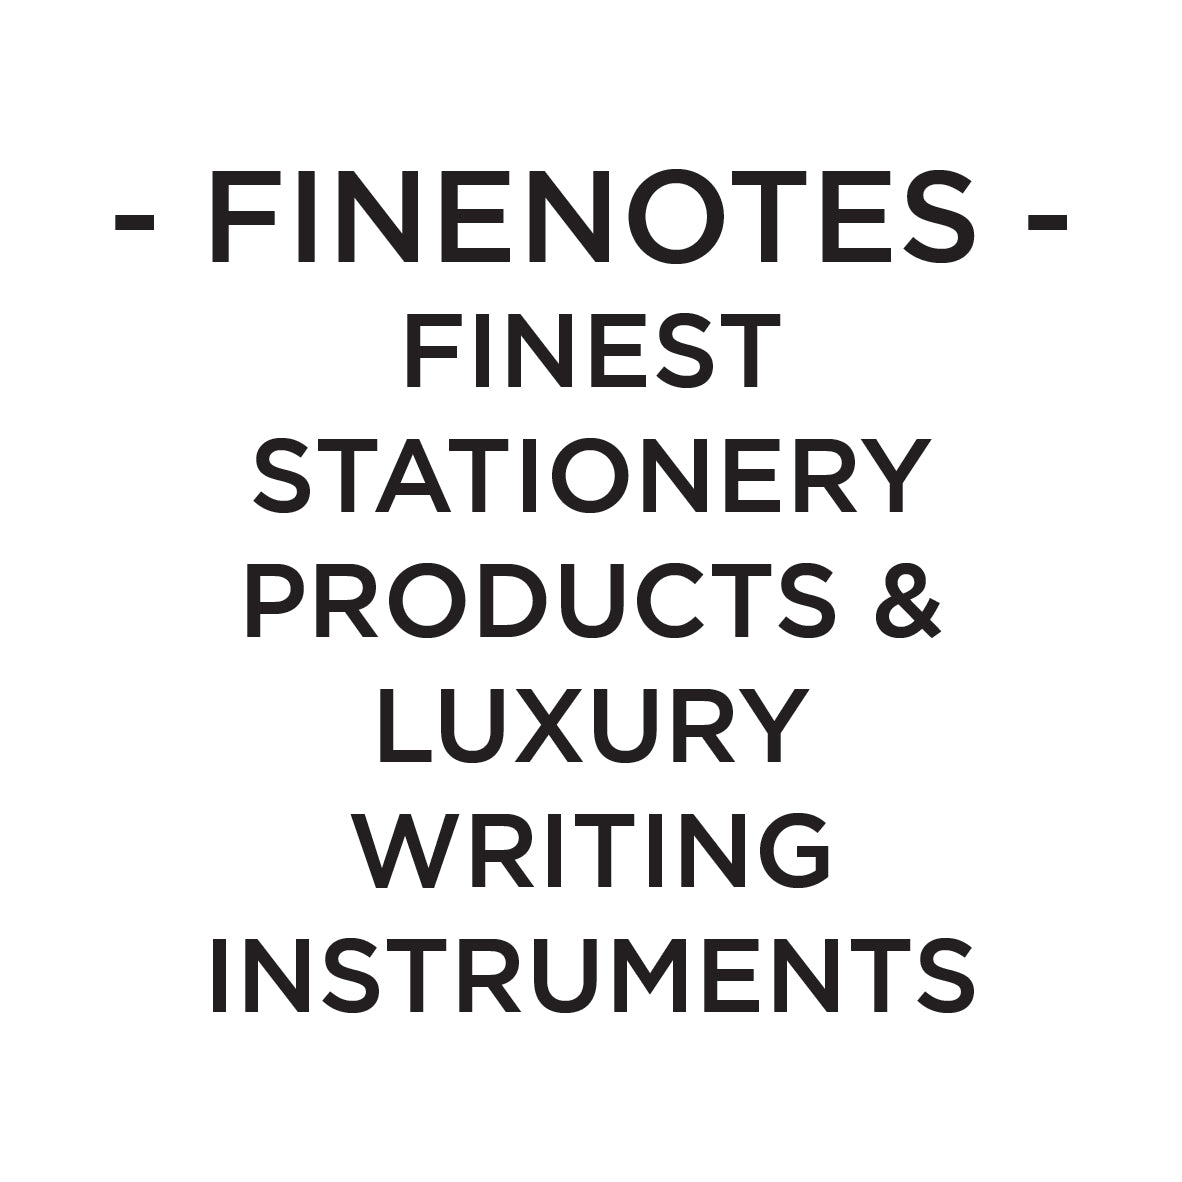 FineNotes - Finest Stationery Products & Luxury Writing Instruments